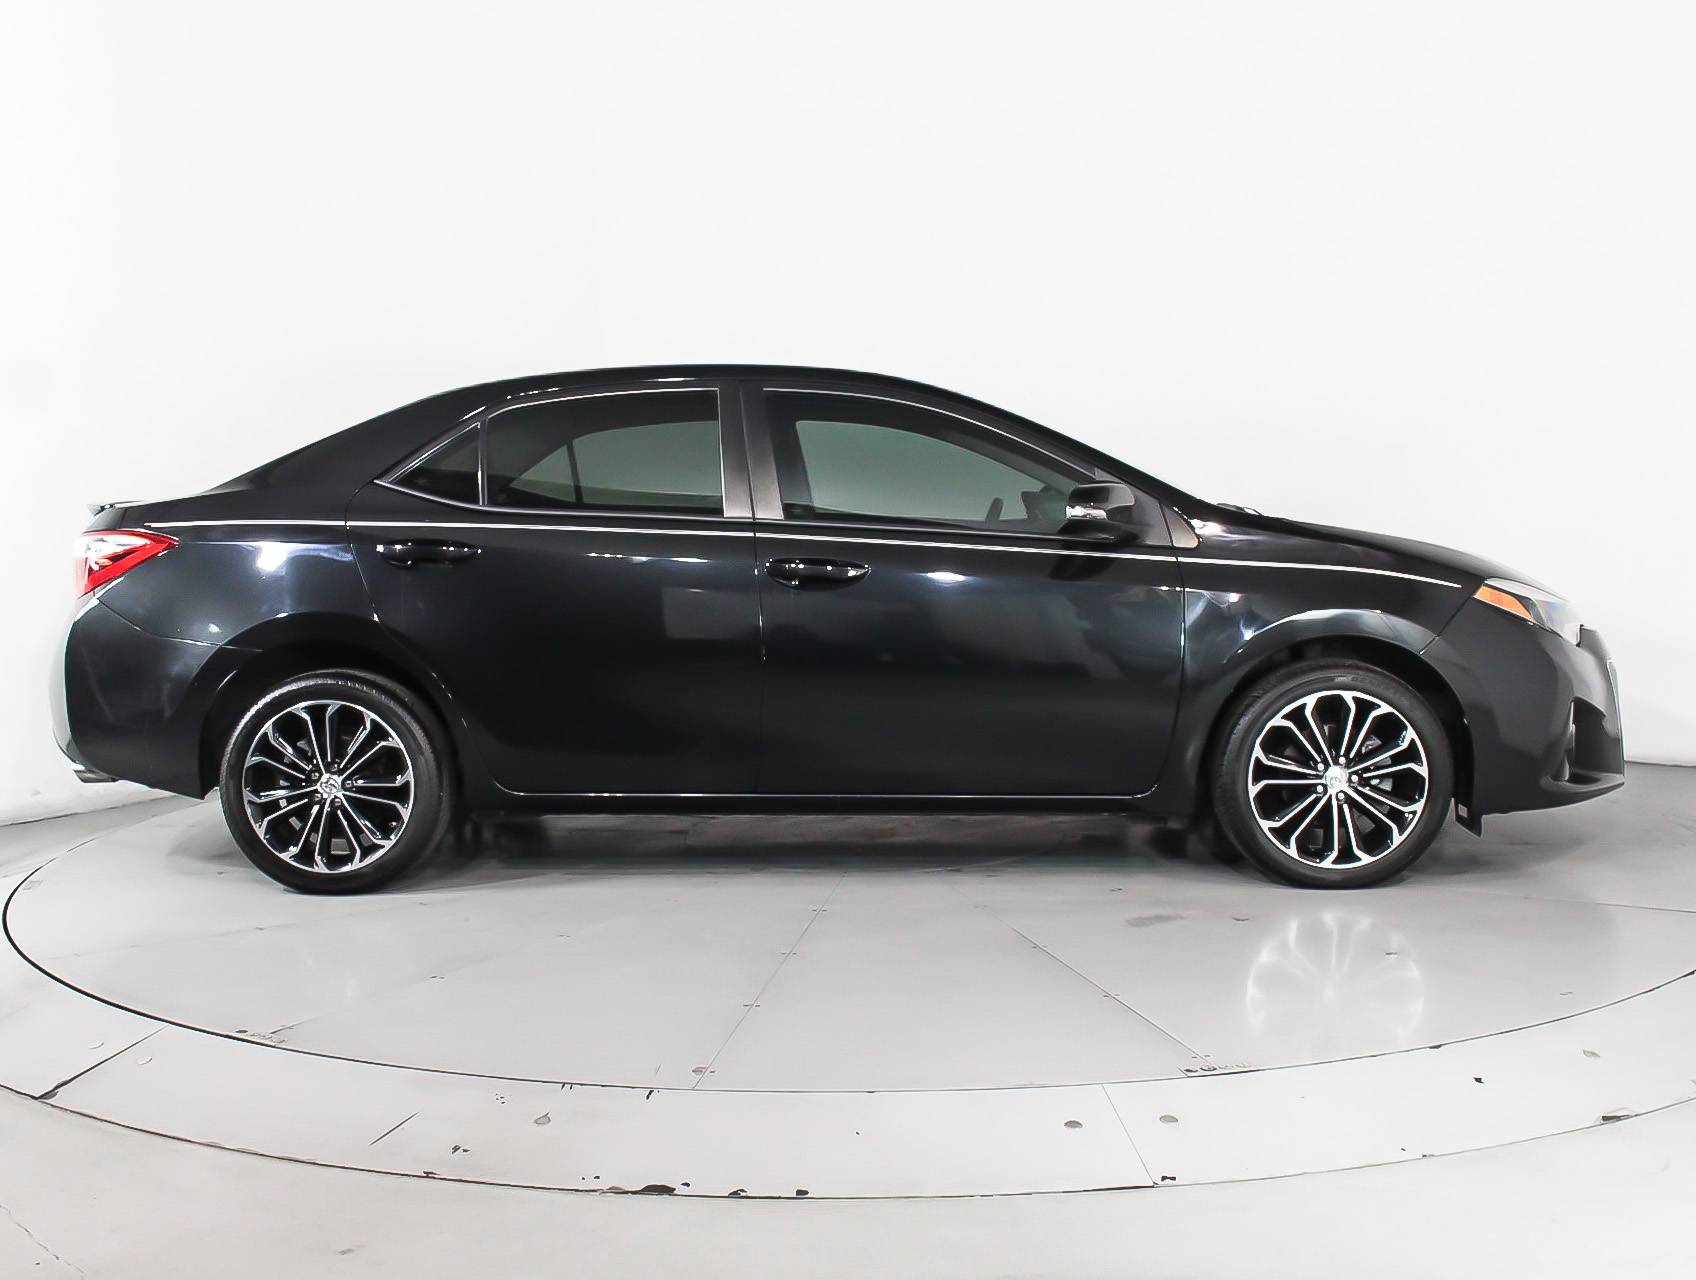 Florida Fine Cars - Used TOYOTA COROLLA 2015 WEST PALM S